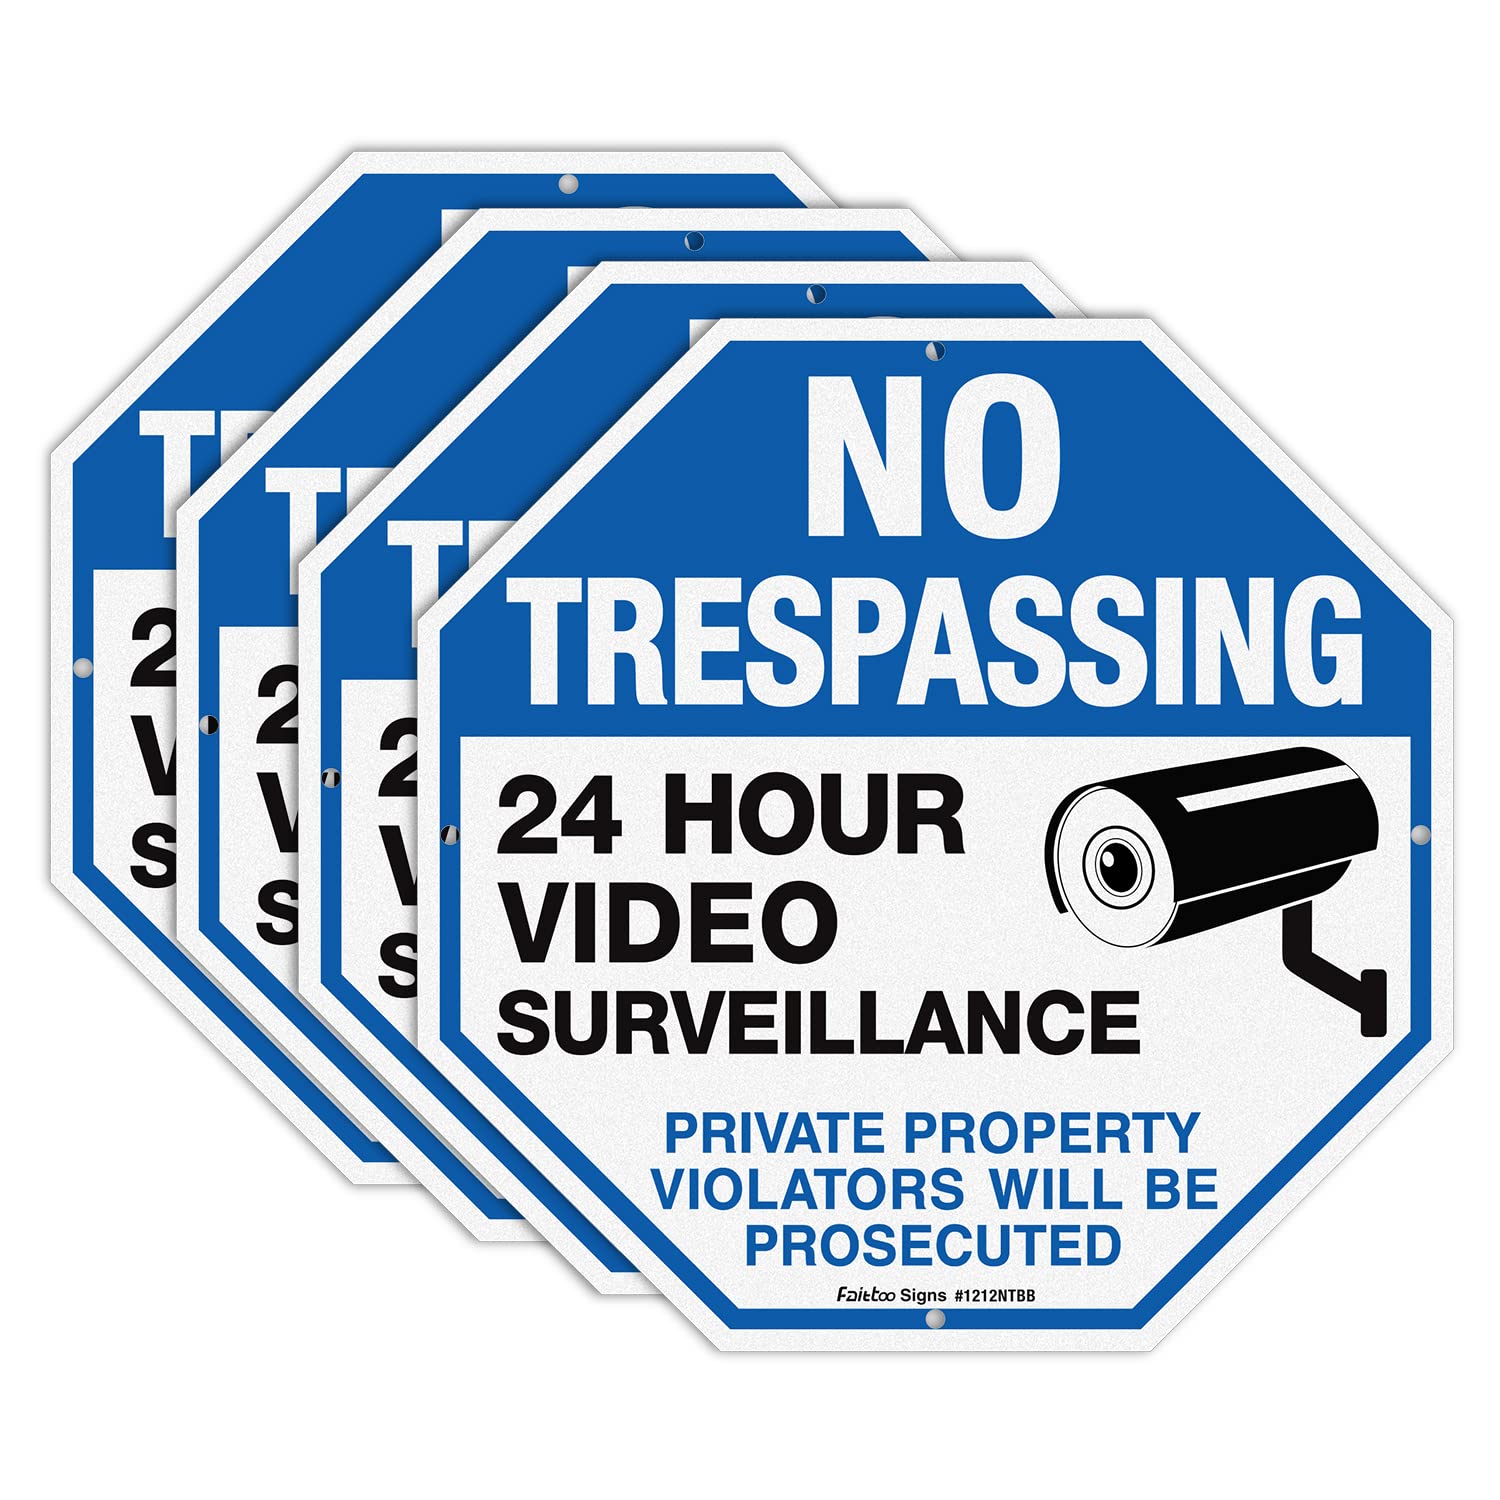 2-Pack No Trespassing Sign Private Property Protected By Video Surveillance Violators Will Be Prosecuted Sign, 12 x 12 Inch Reflective Aluminum, UV Protected, Weather/Fade Resistant, Easy to Install